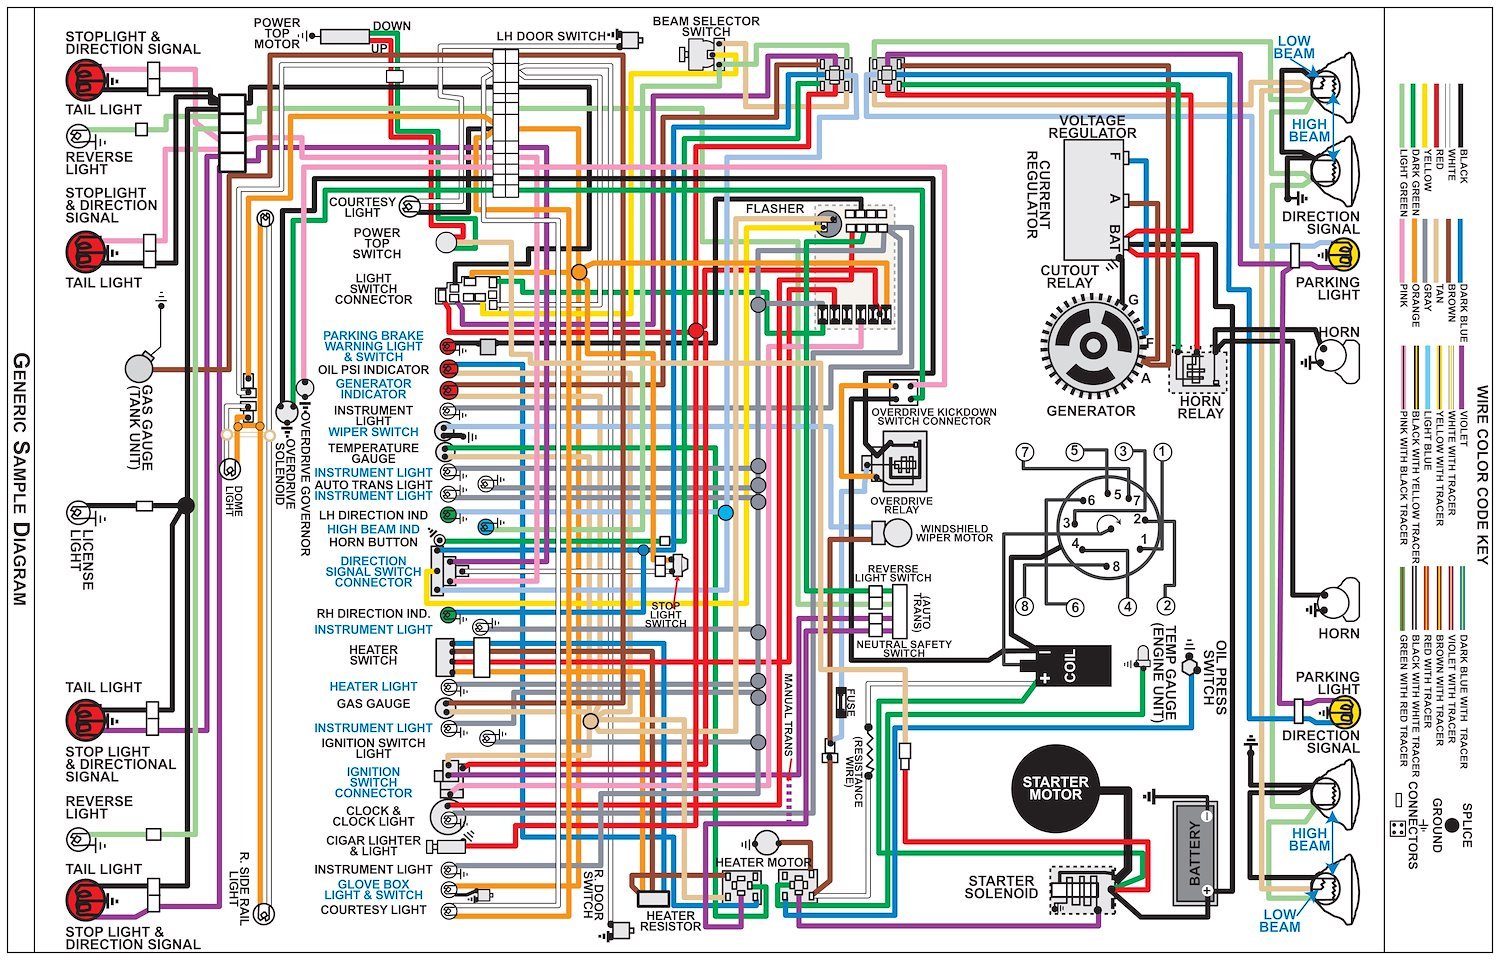 Wiring Diagram for 1959 GMC Truck, 11 in. x 17 in., Laminated